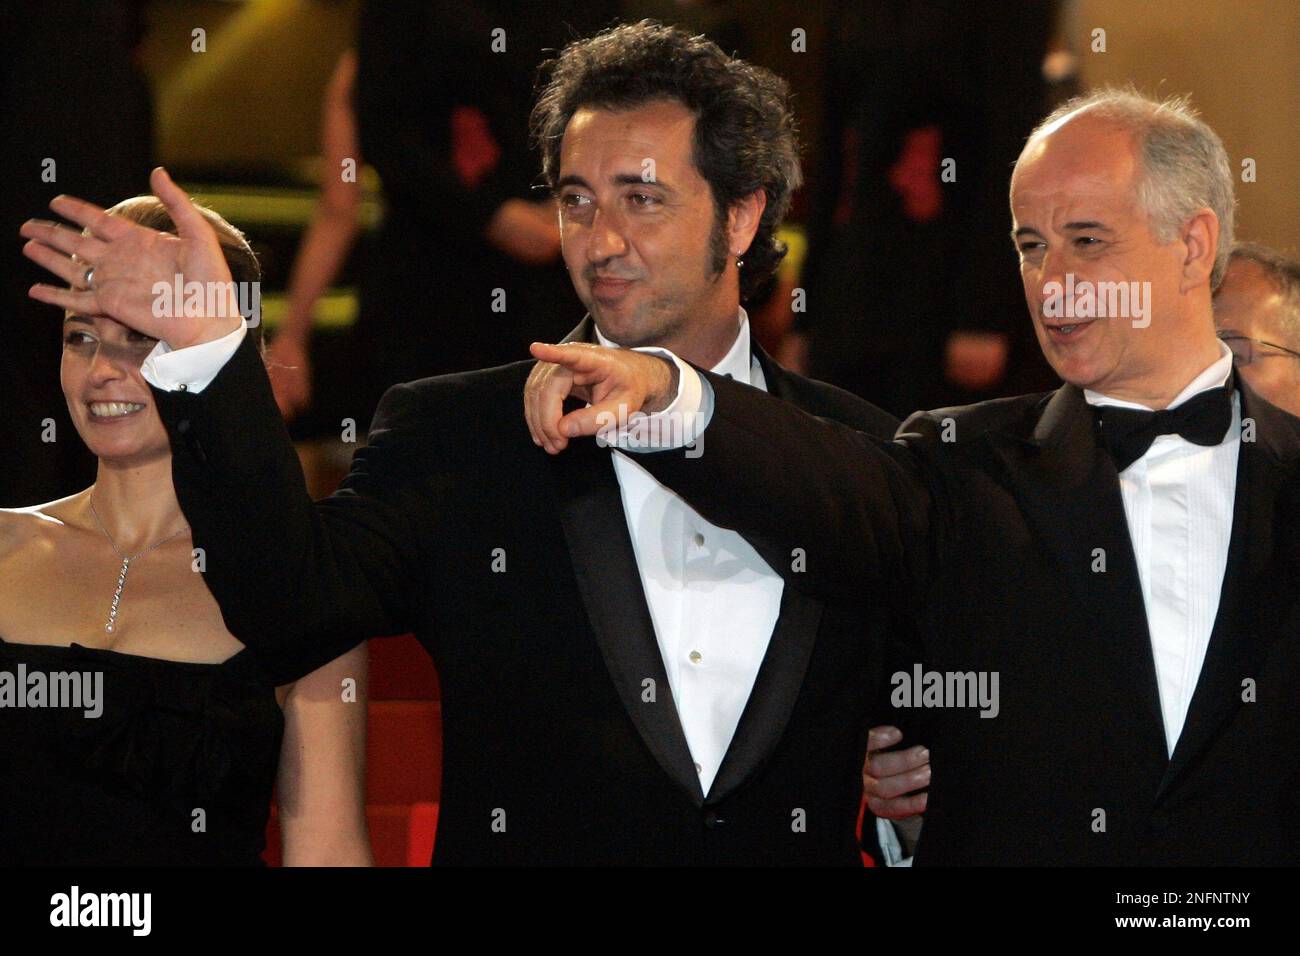 From L to R) Anita Kravos, Toni Servillo, Sabrina Ferilli and Paolo  Sorrentino arrive at a photo call for the film La Grande Bellezza (The  Great Beauty) during the 66th annual Cannes